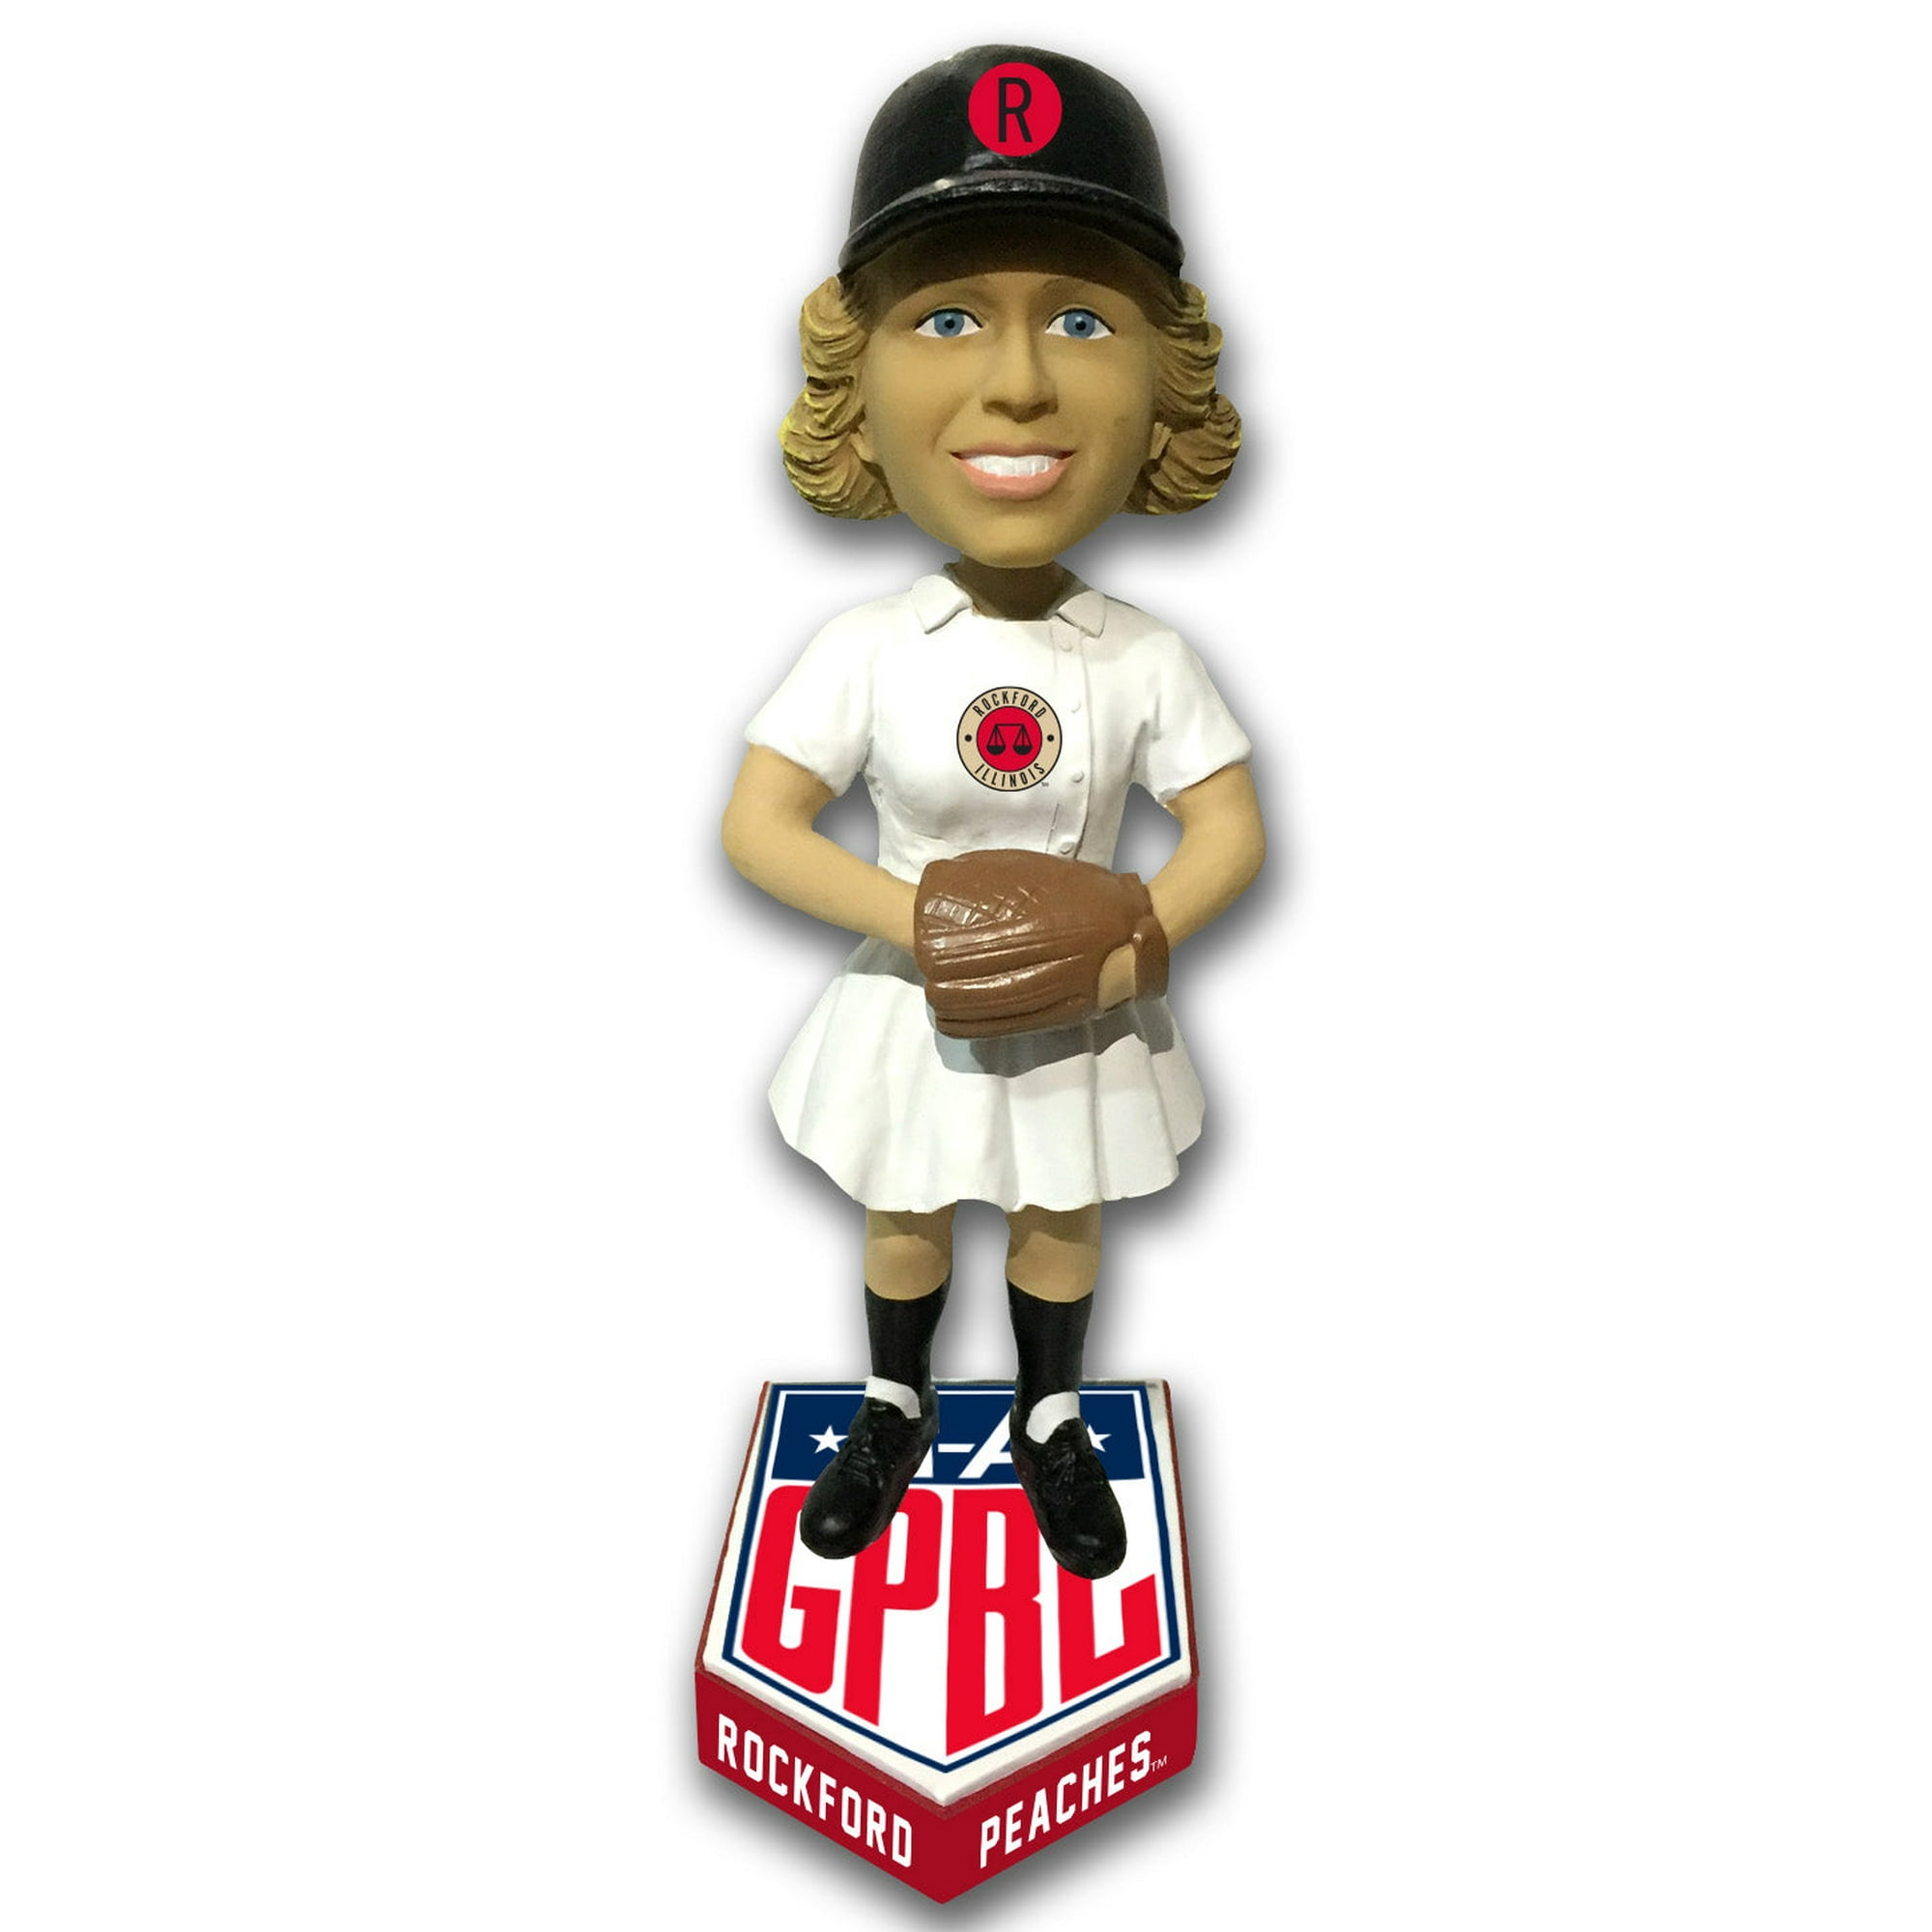 Rockford Peaches Vintage Rockford Peaches White Uniform AAGPBL Bobblehead Aagpbl, Size: 8 Inches Tall